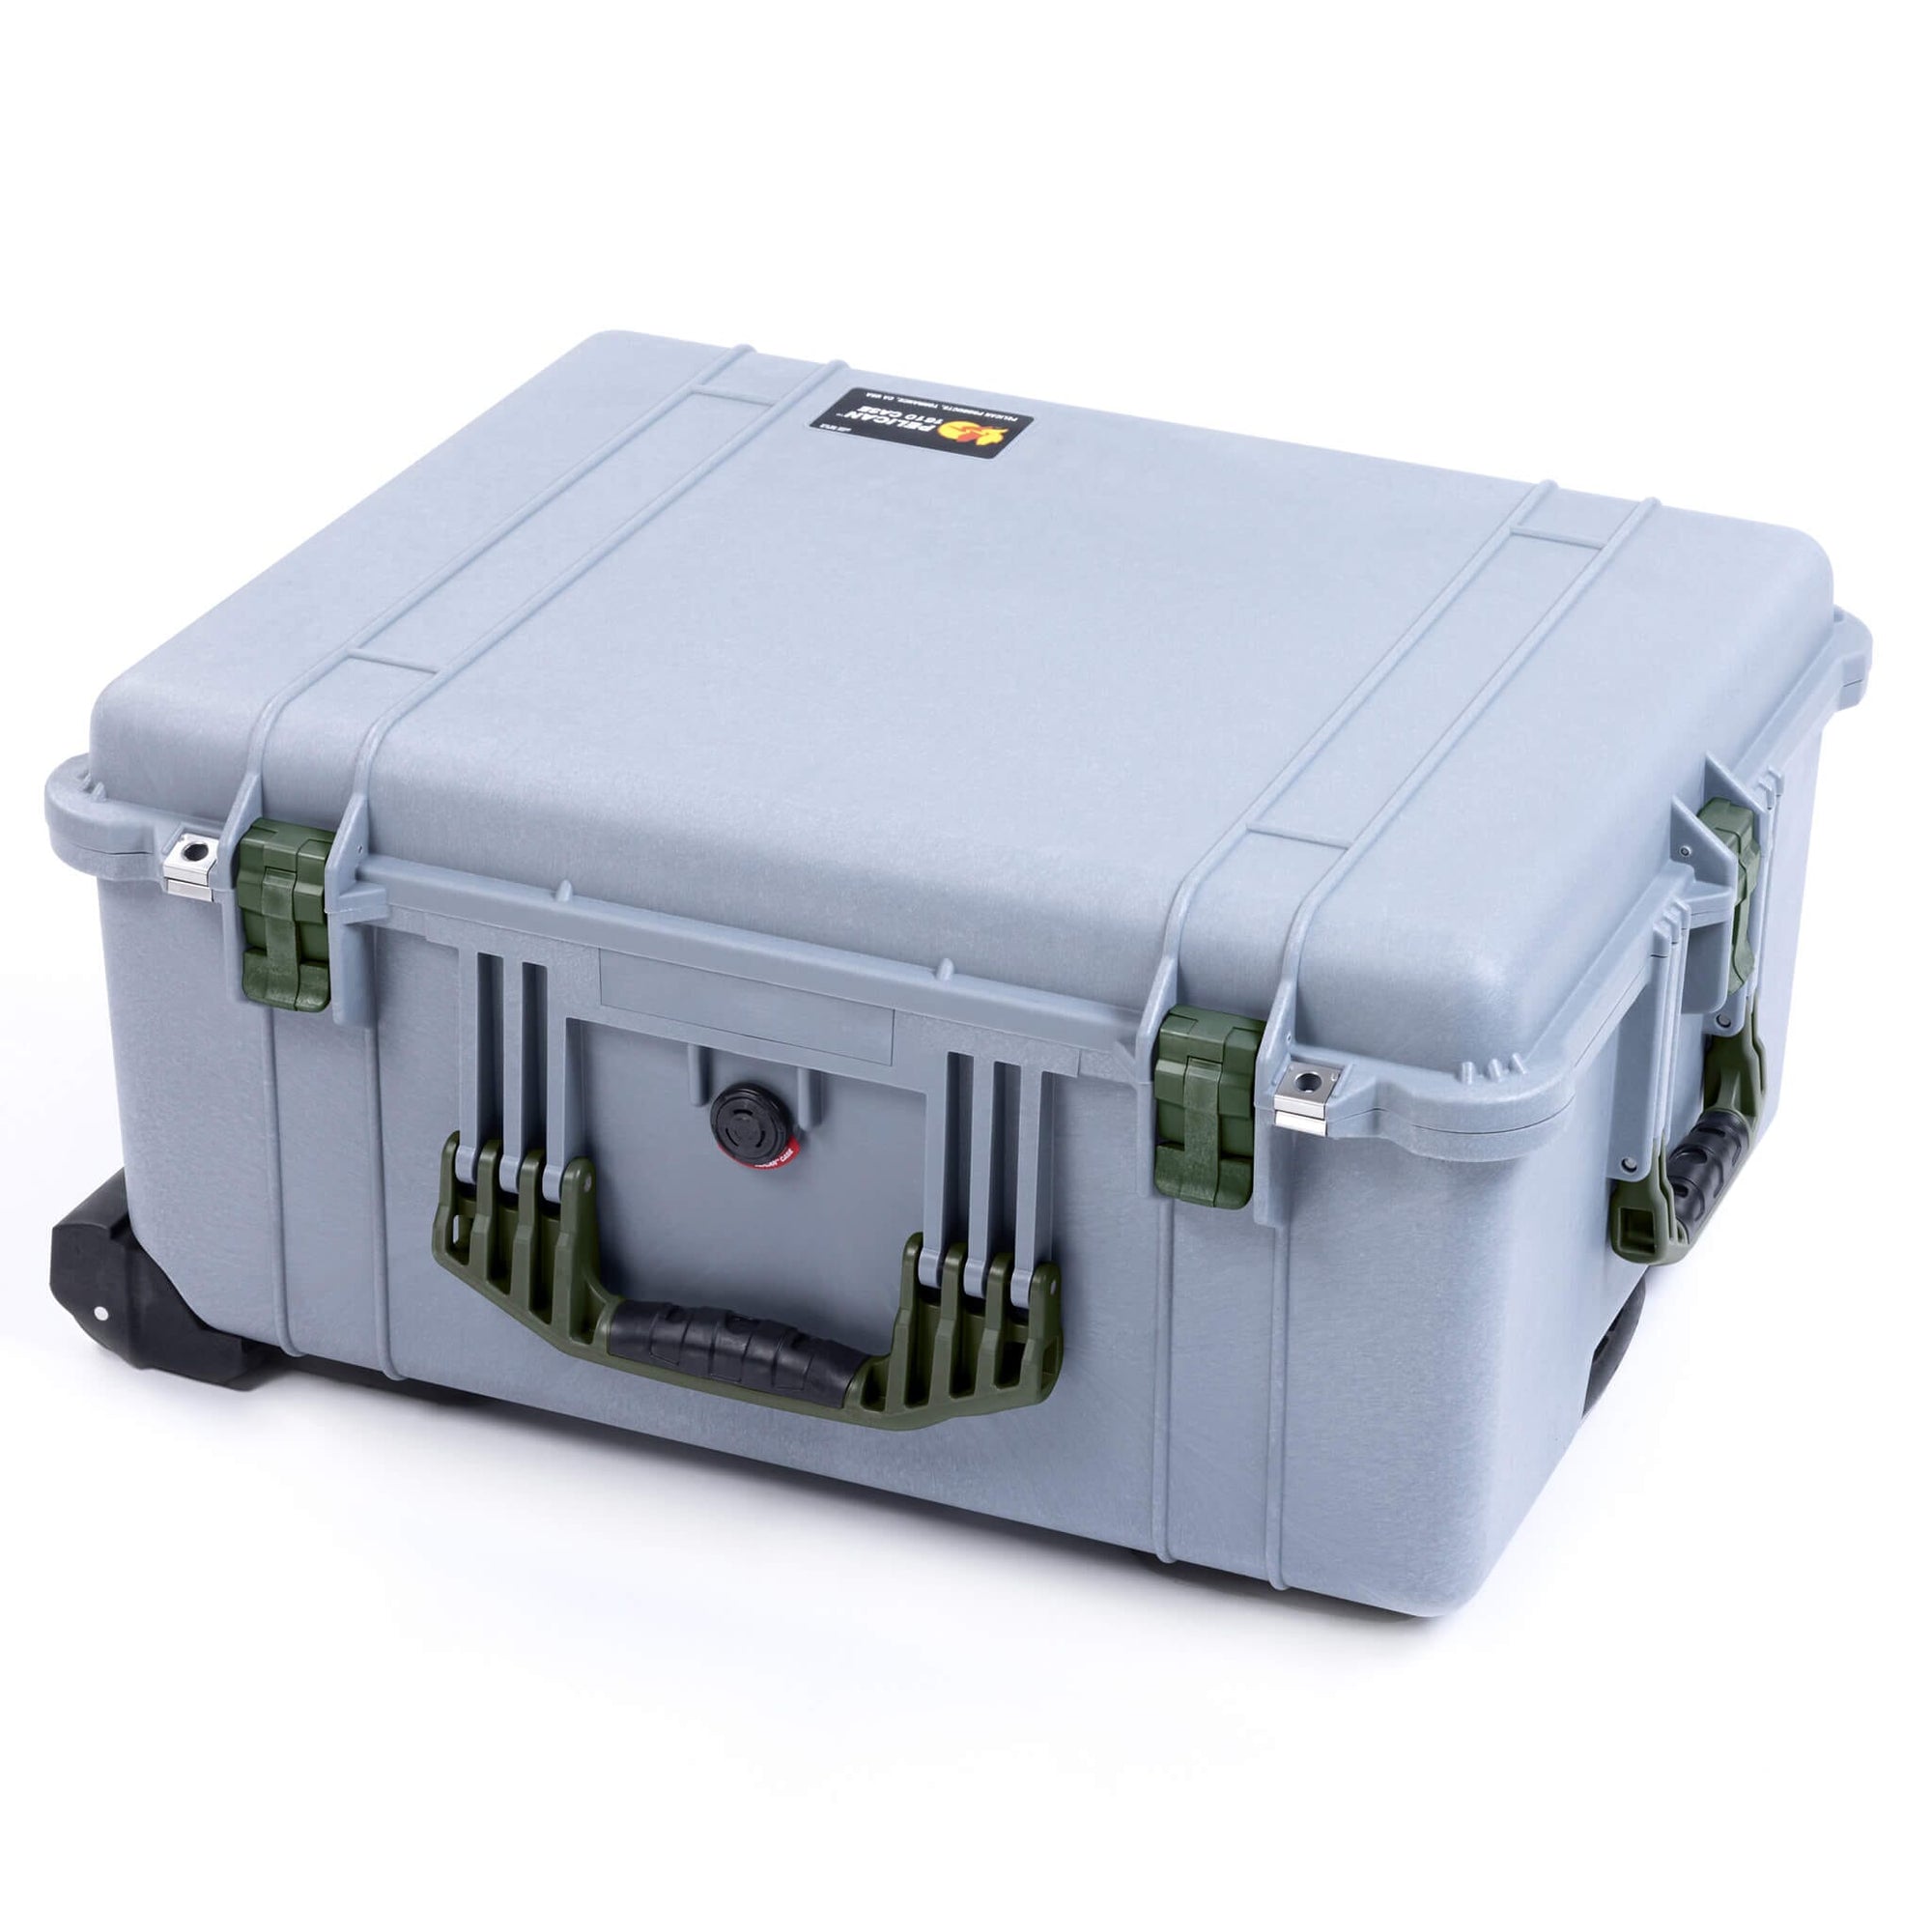 Pelican 1610 Case, Silver with OD Green Handles & Latches